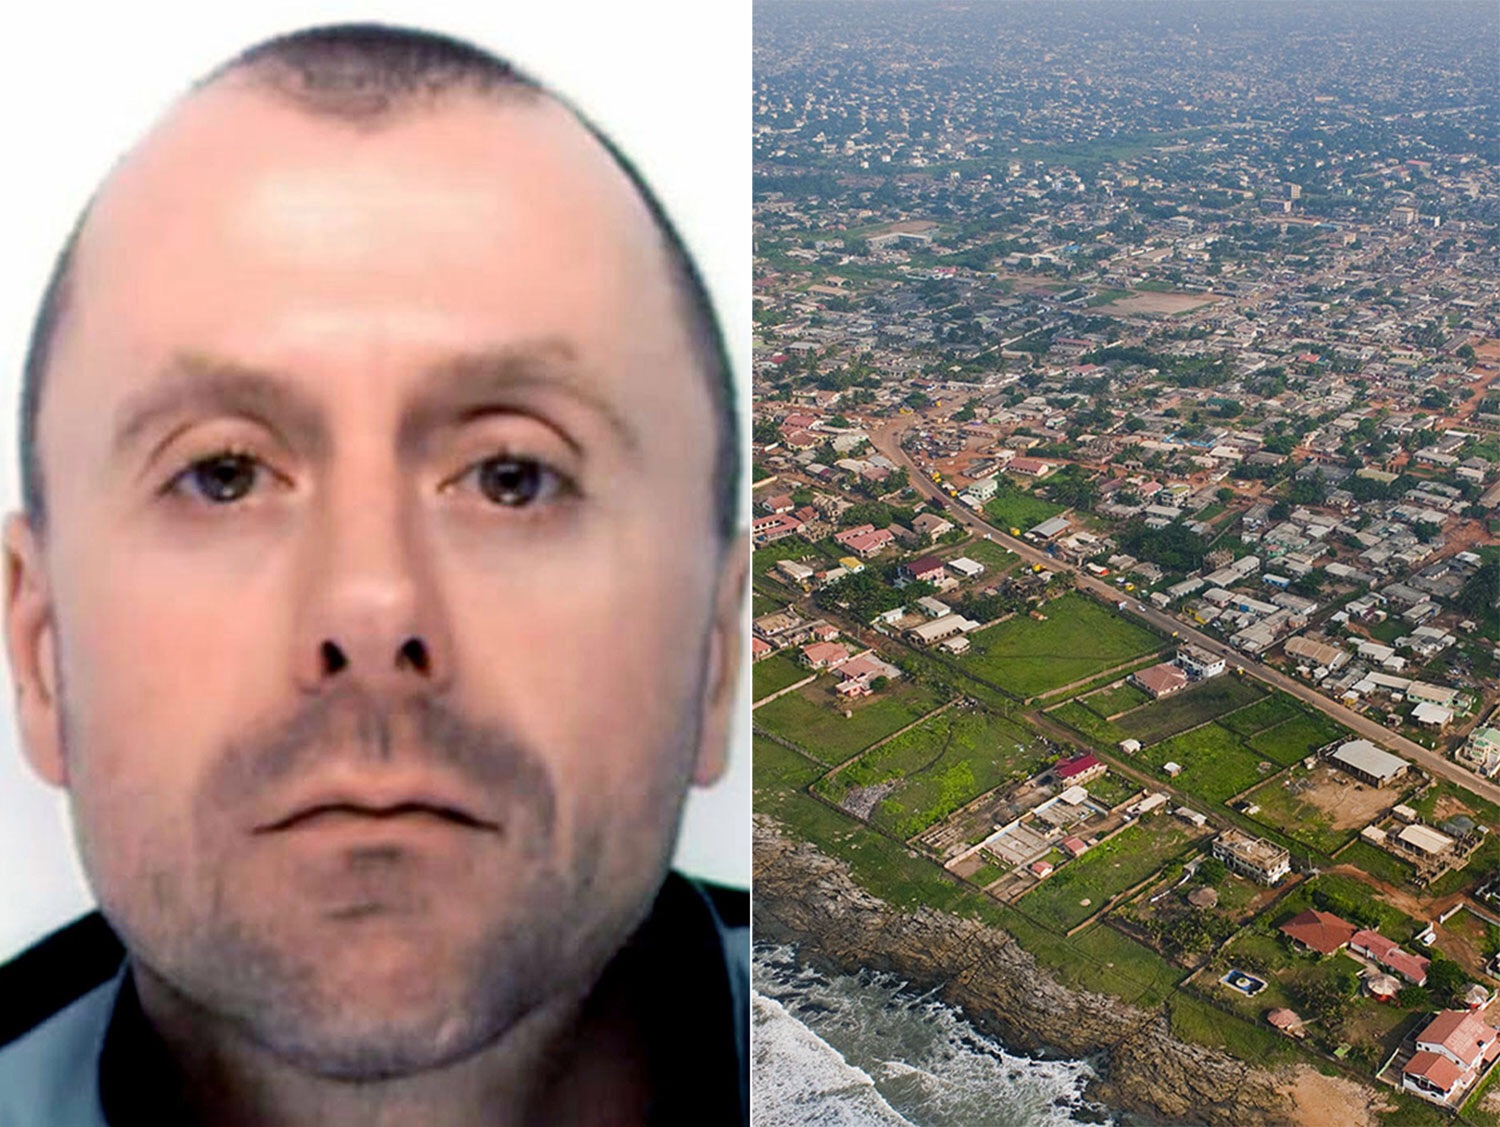 Fugitive British drug lord wanted over plot to smuggle £70m cocaine arrested in Ghana